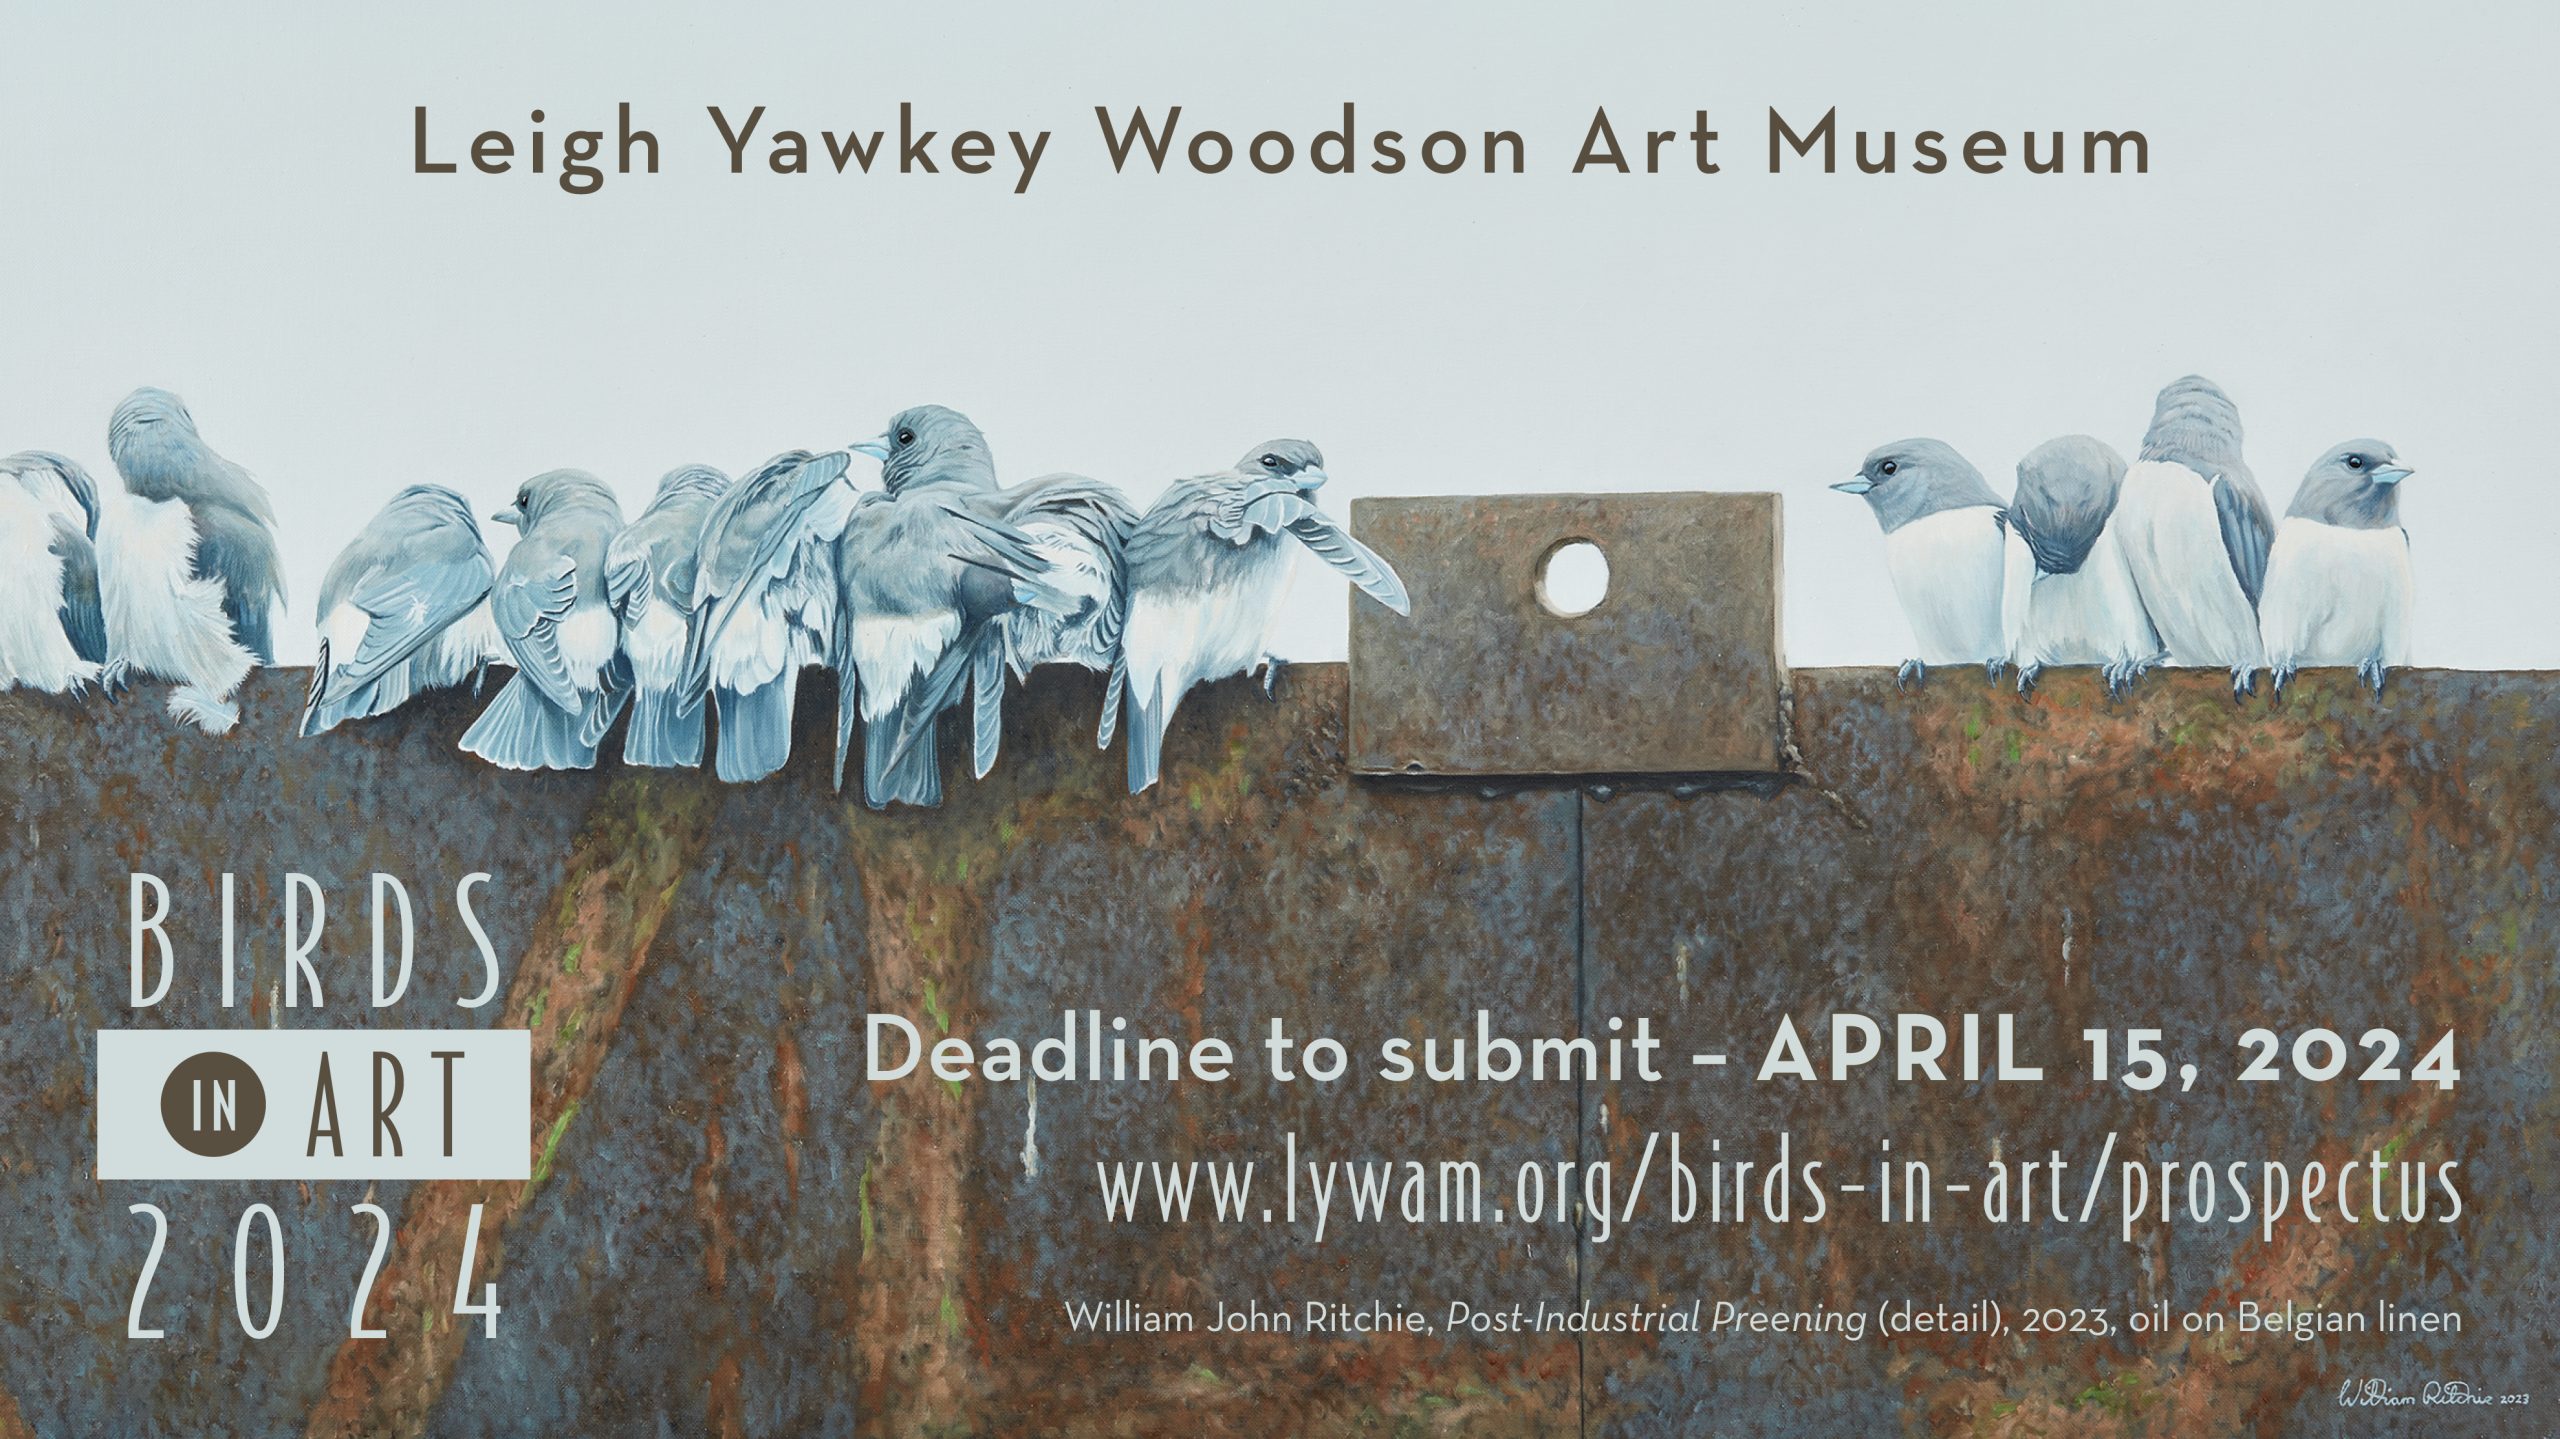 Ad for submitting to birds in art, deadline to submit April 15, artwrok of birds sitting on post